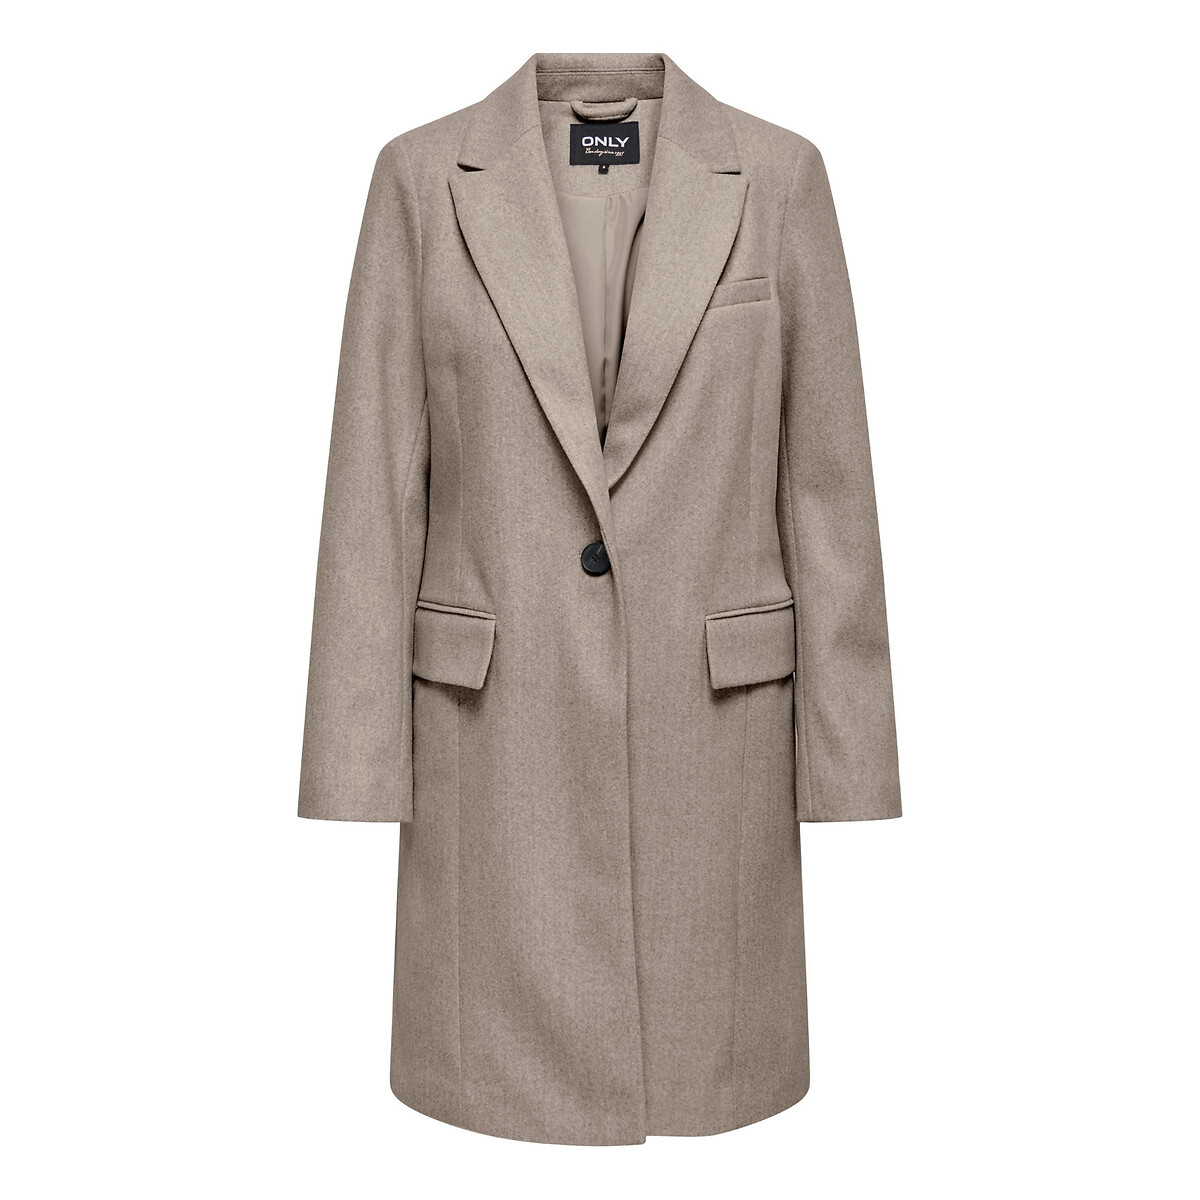 Image of Buttoned Mid-Length Coat, Mid-Season